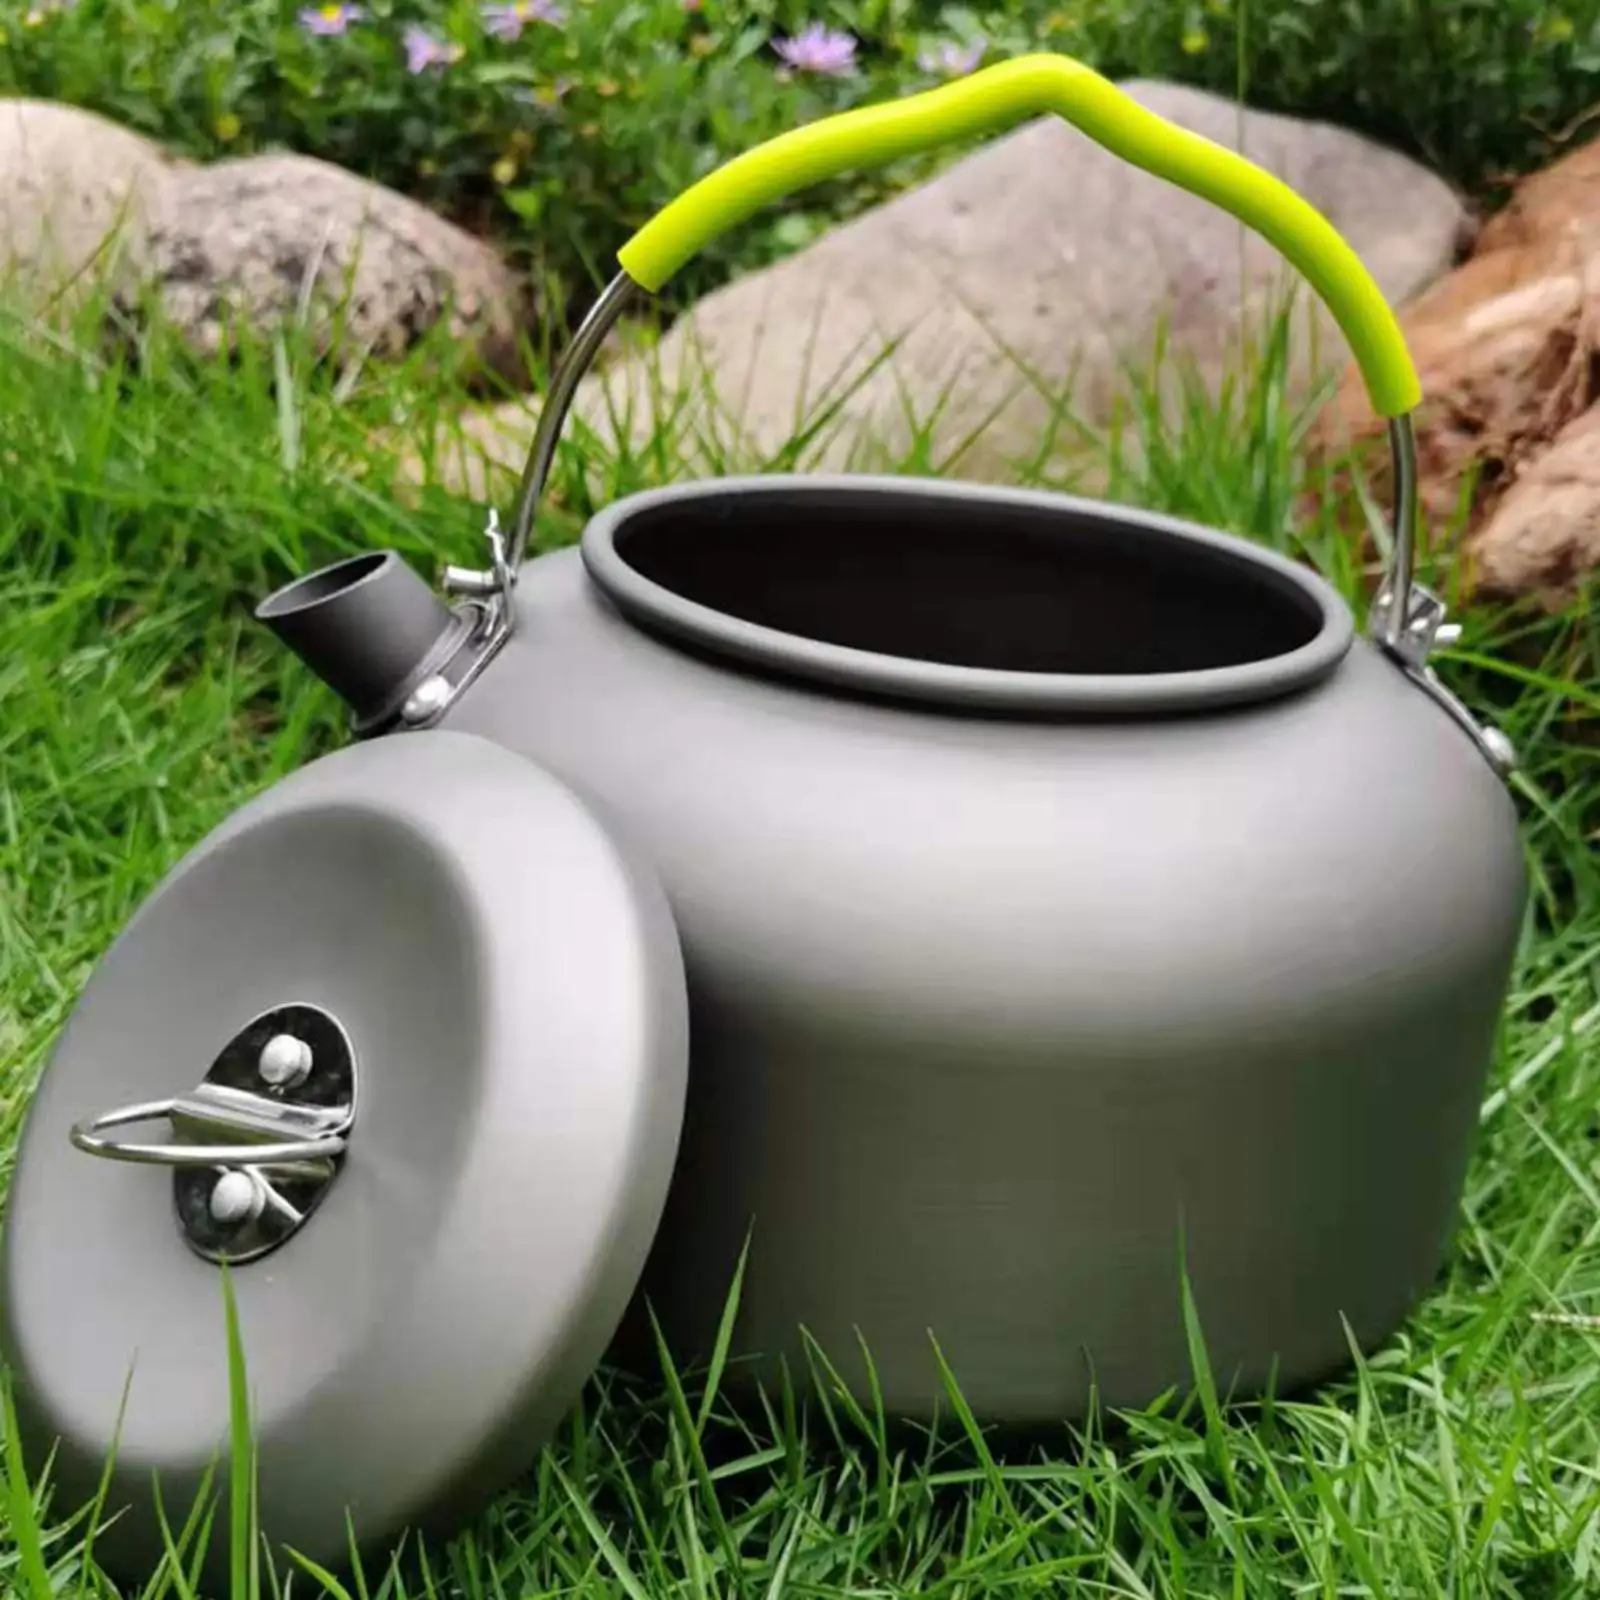 Camping Water Kettle Outdoor Portable Teapot Coffee Pot Cookware for Hiking Camping Travel for Boiling Water